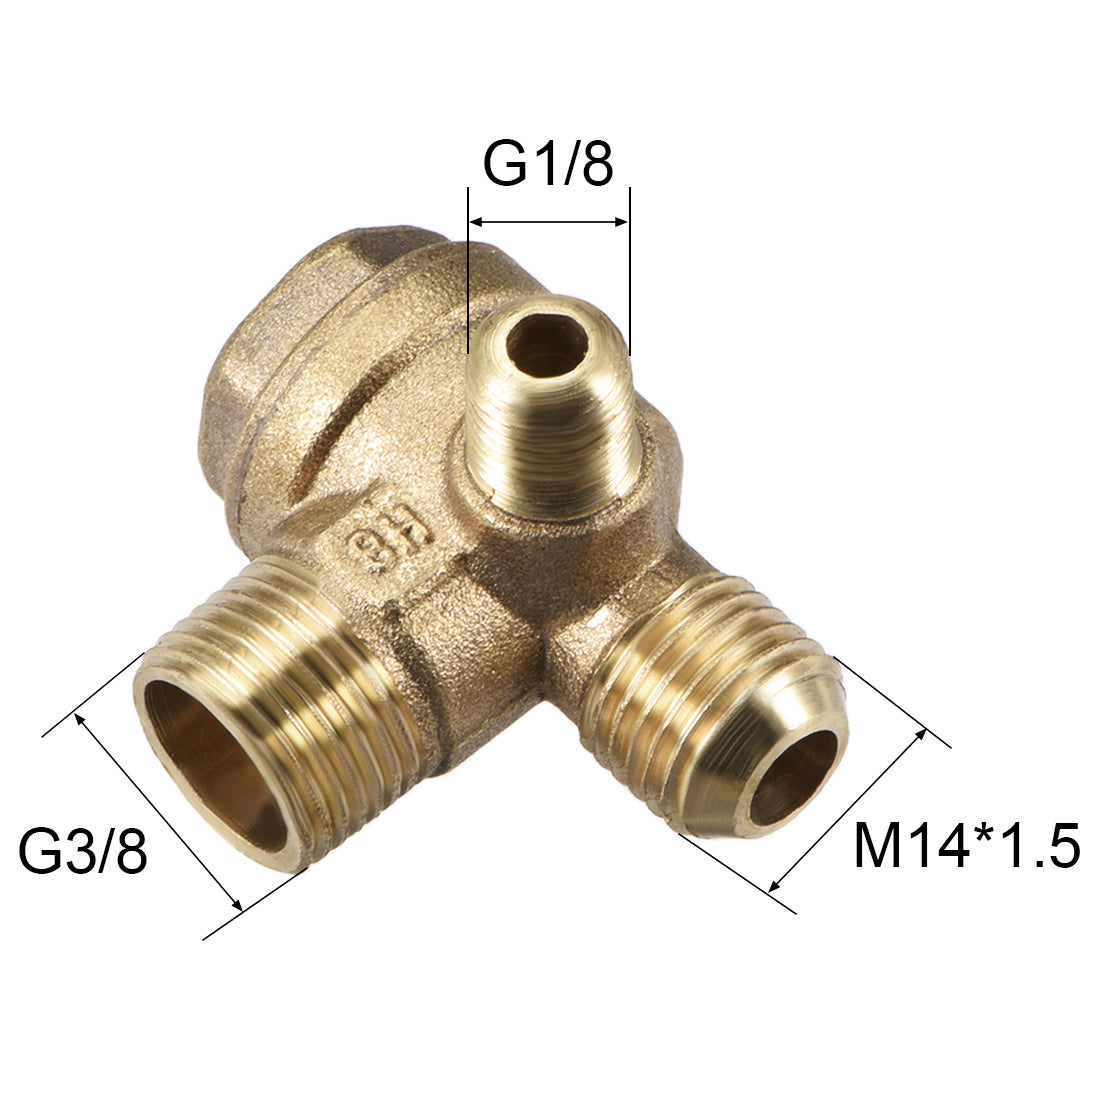 uxcell Uxcell Air Compressor Check Valve 90 Degree Male Threaded Brass M10xM14xPT3/8 3Pcs